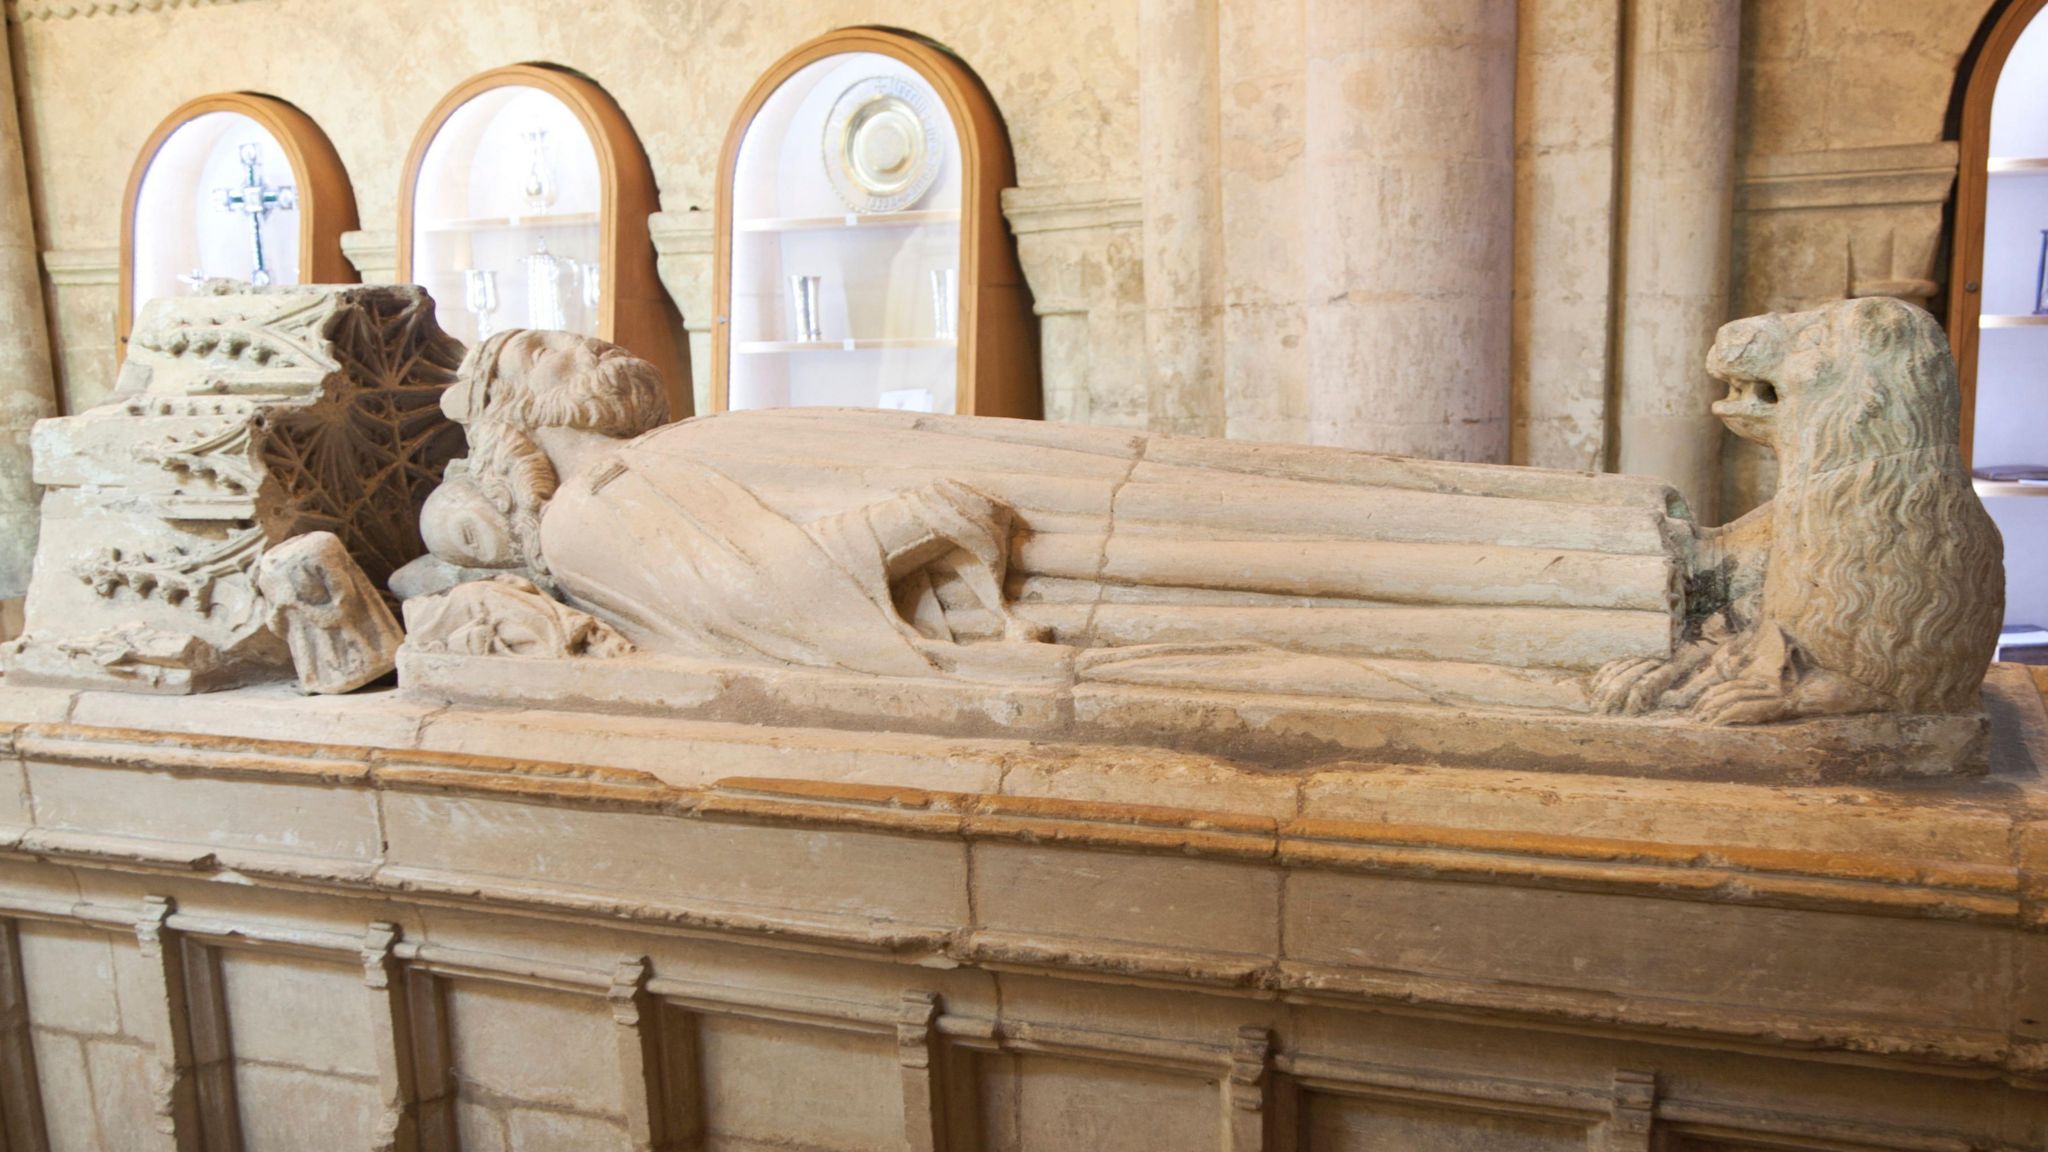 The tomb of King Athelstan in Malmesbury Abbey with a sculpture of the king on top.